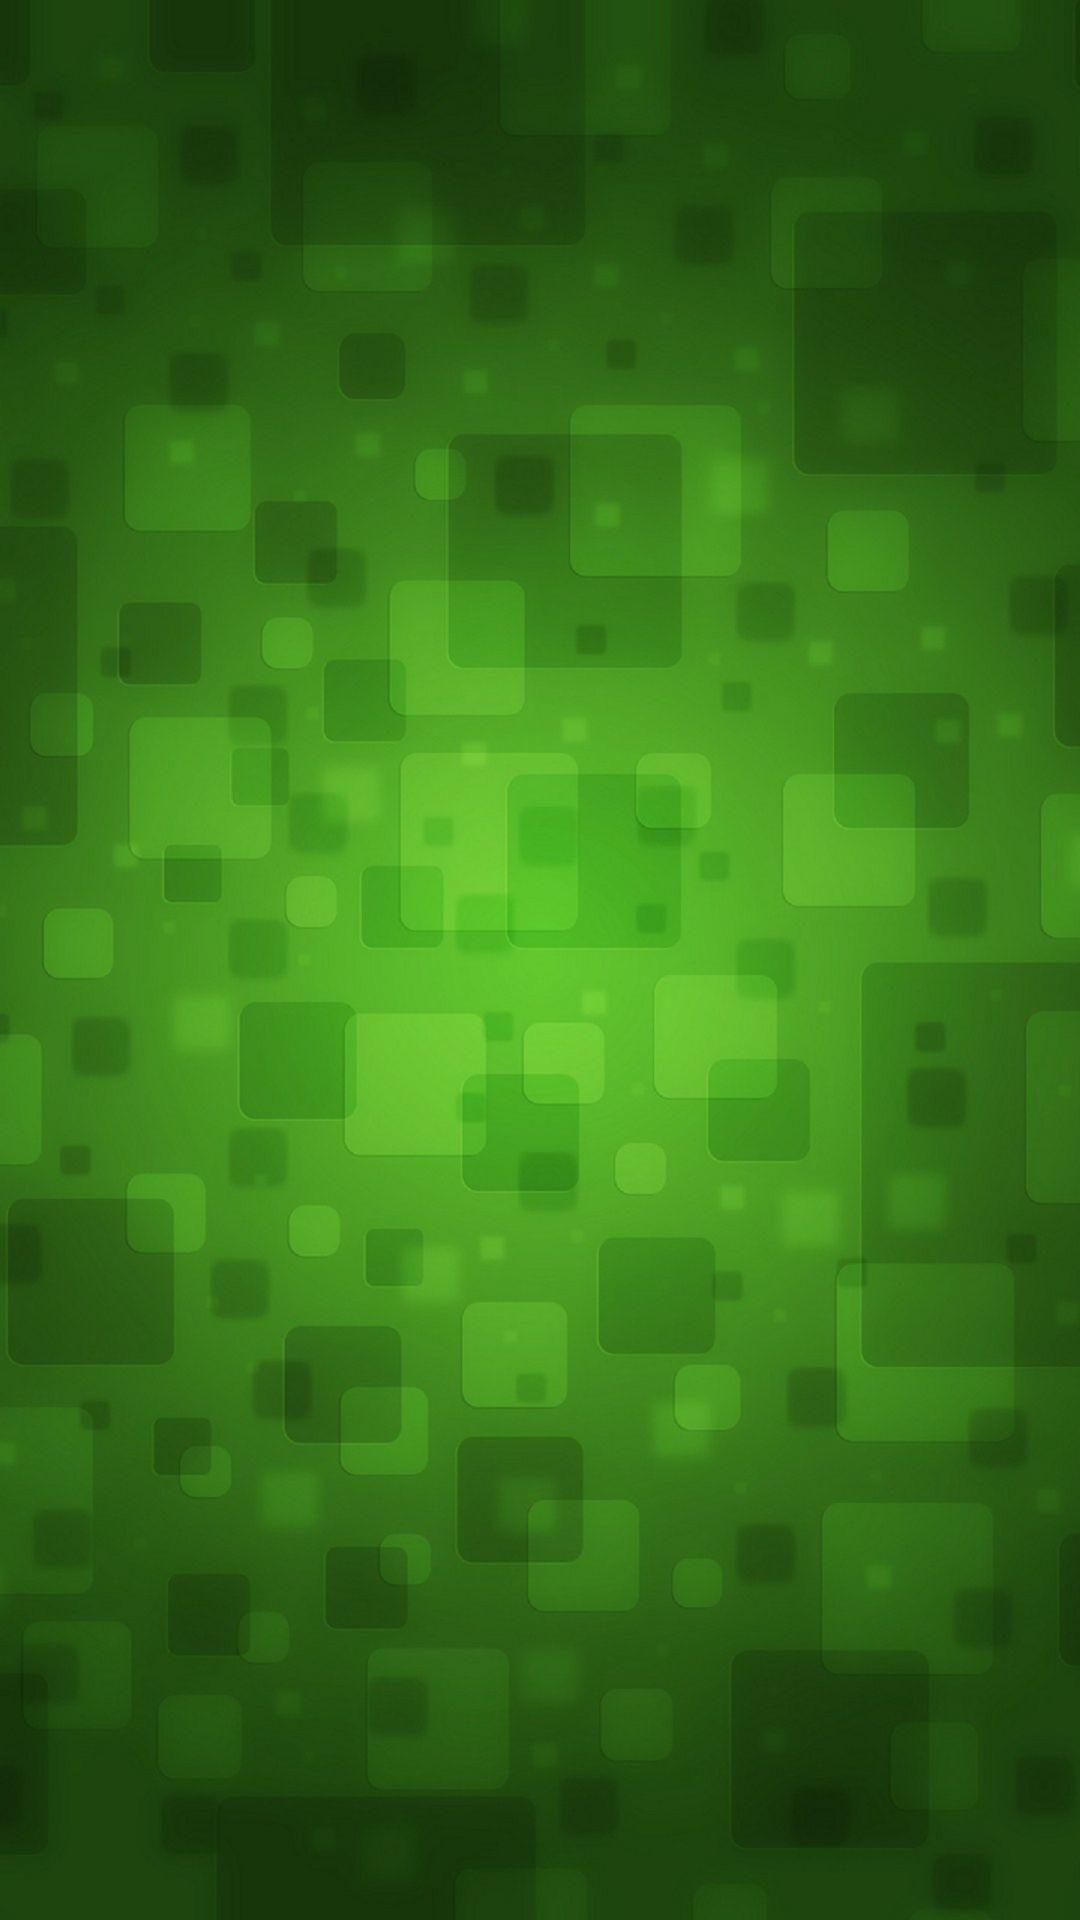 Abstract Green Blocks Android Wallpaper free download